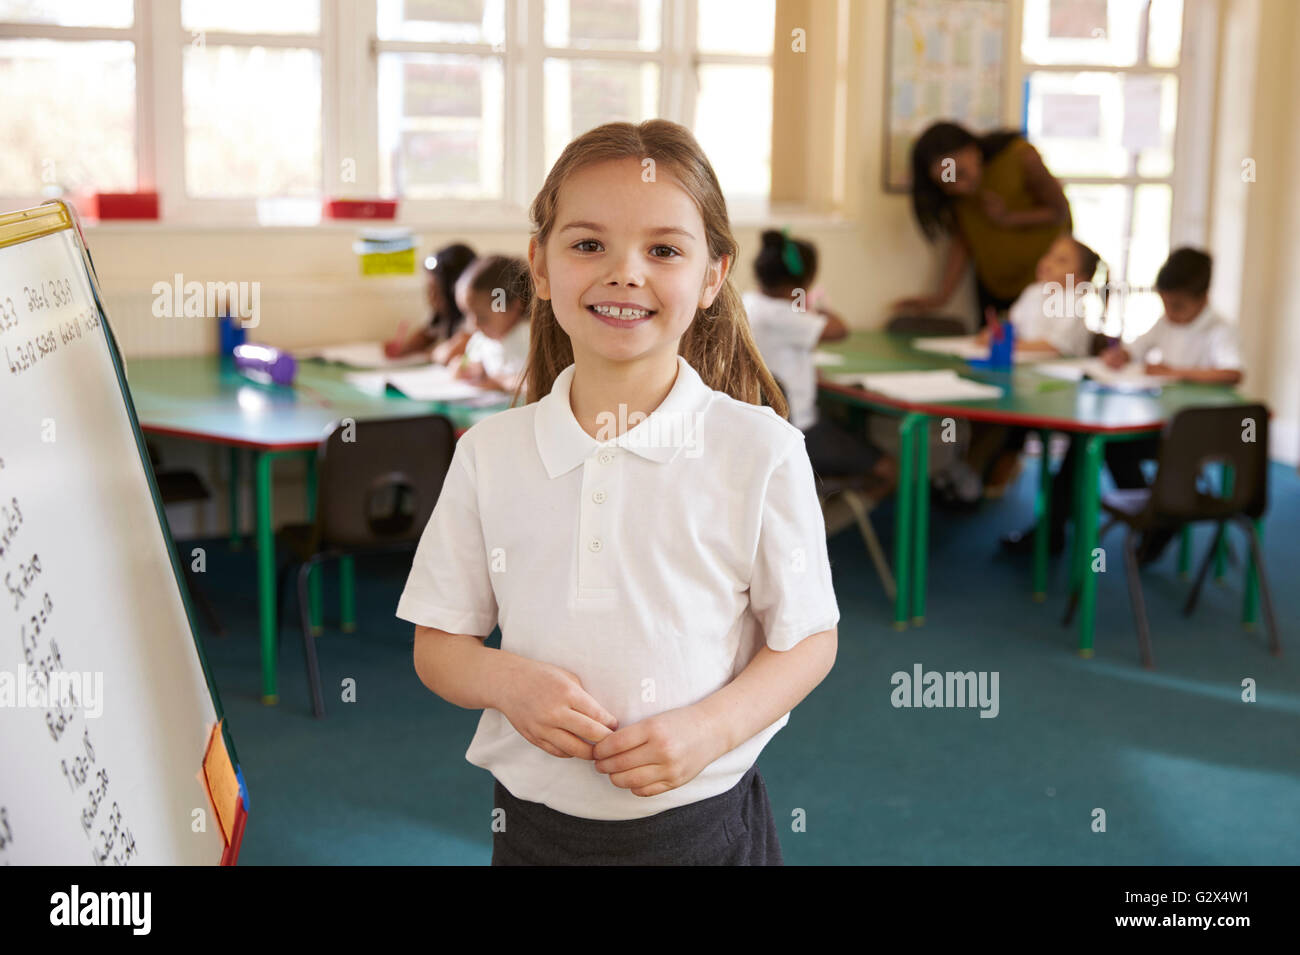 Portrait Of Elementary School Pupil With Whiteboard In Class Stock Photo